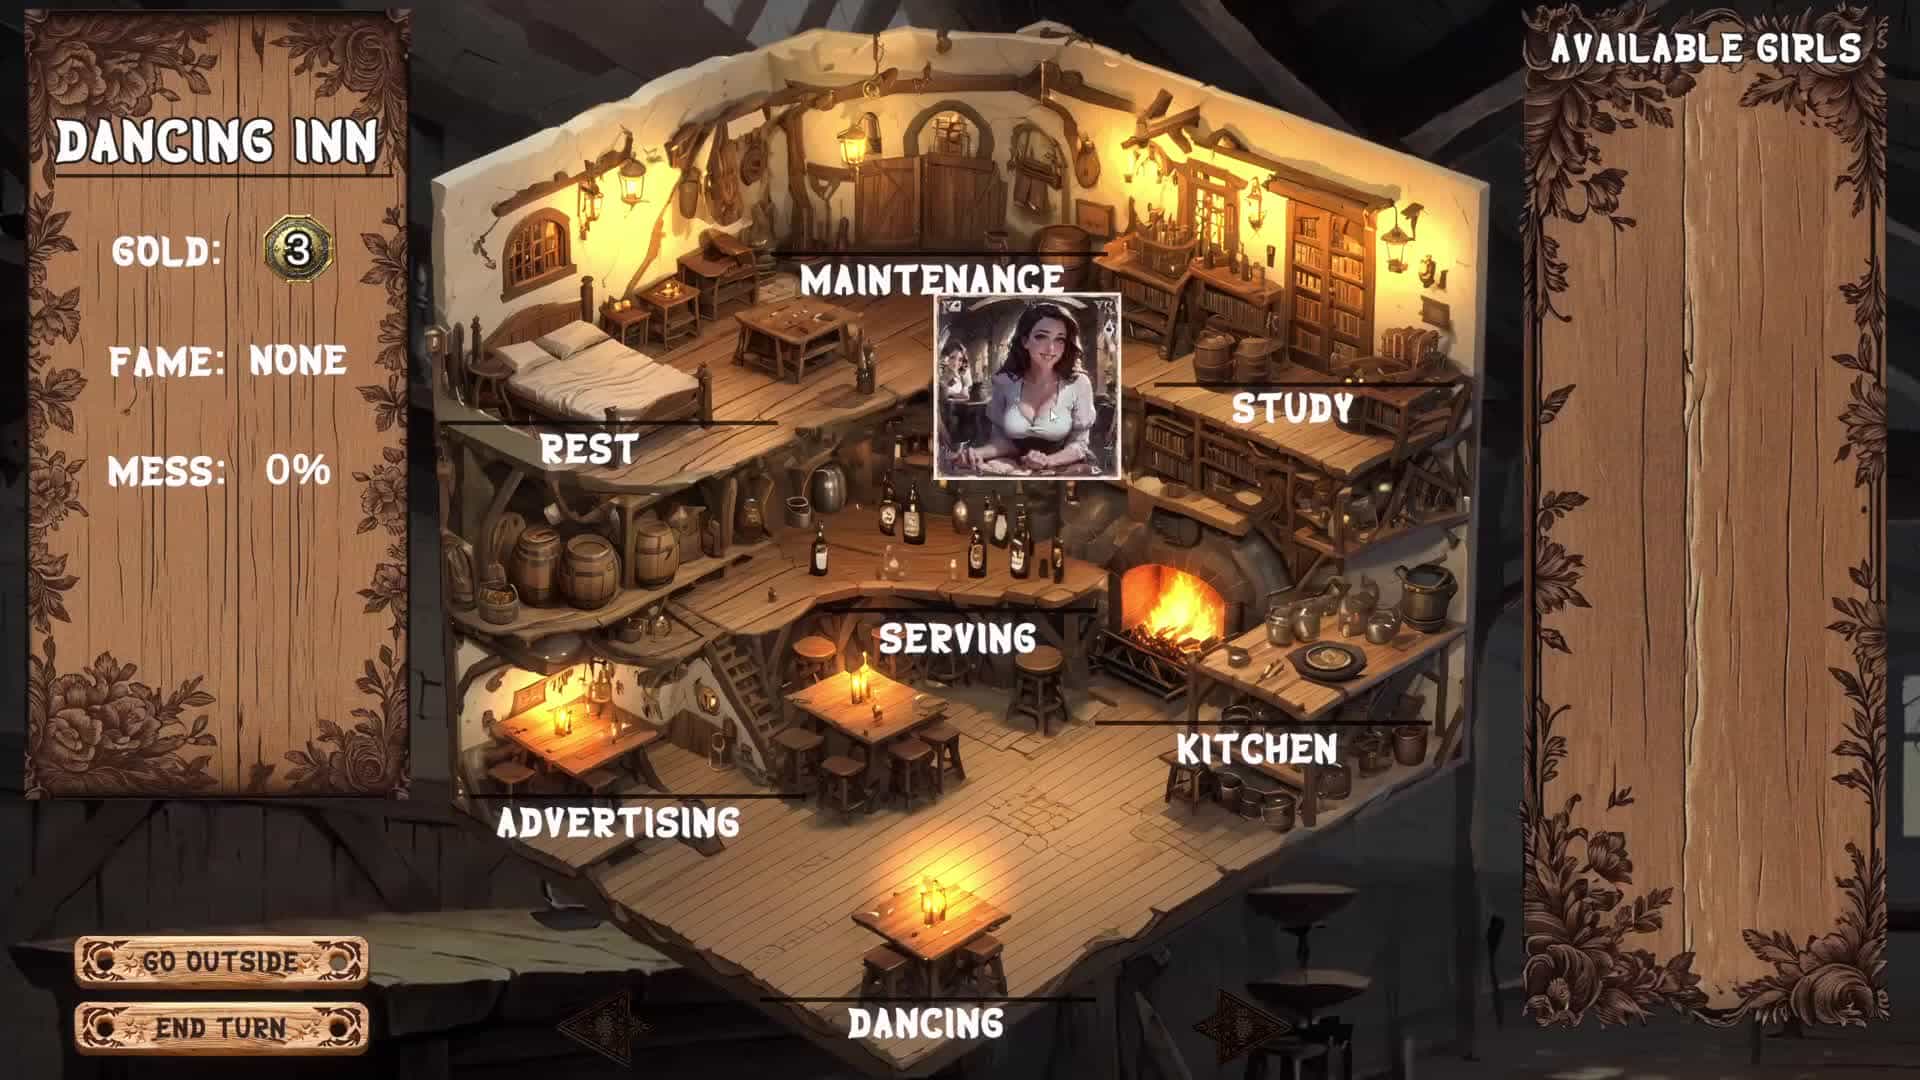 First gameplay look at the Dancing Inn